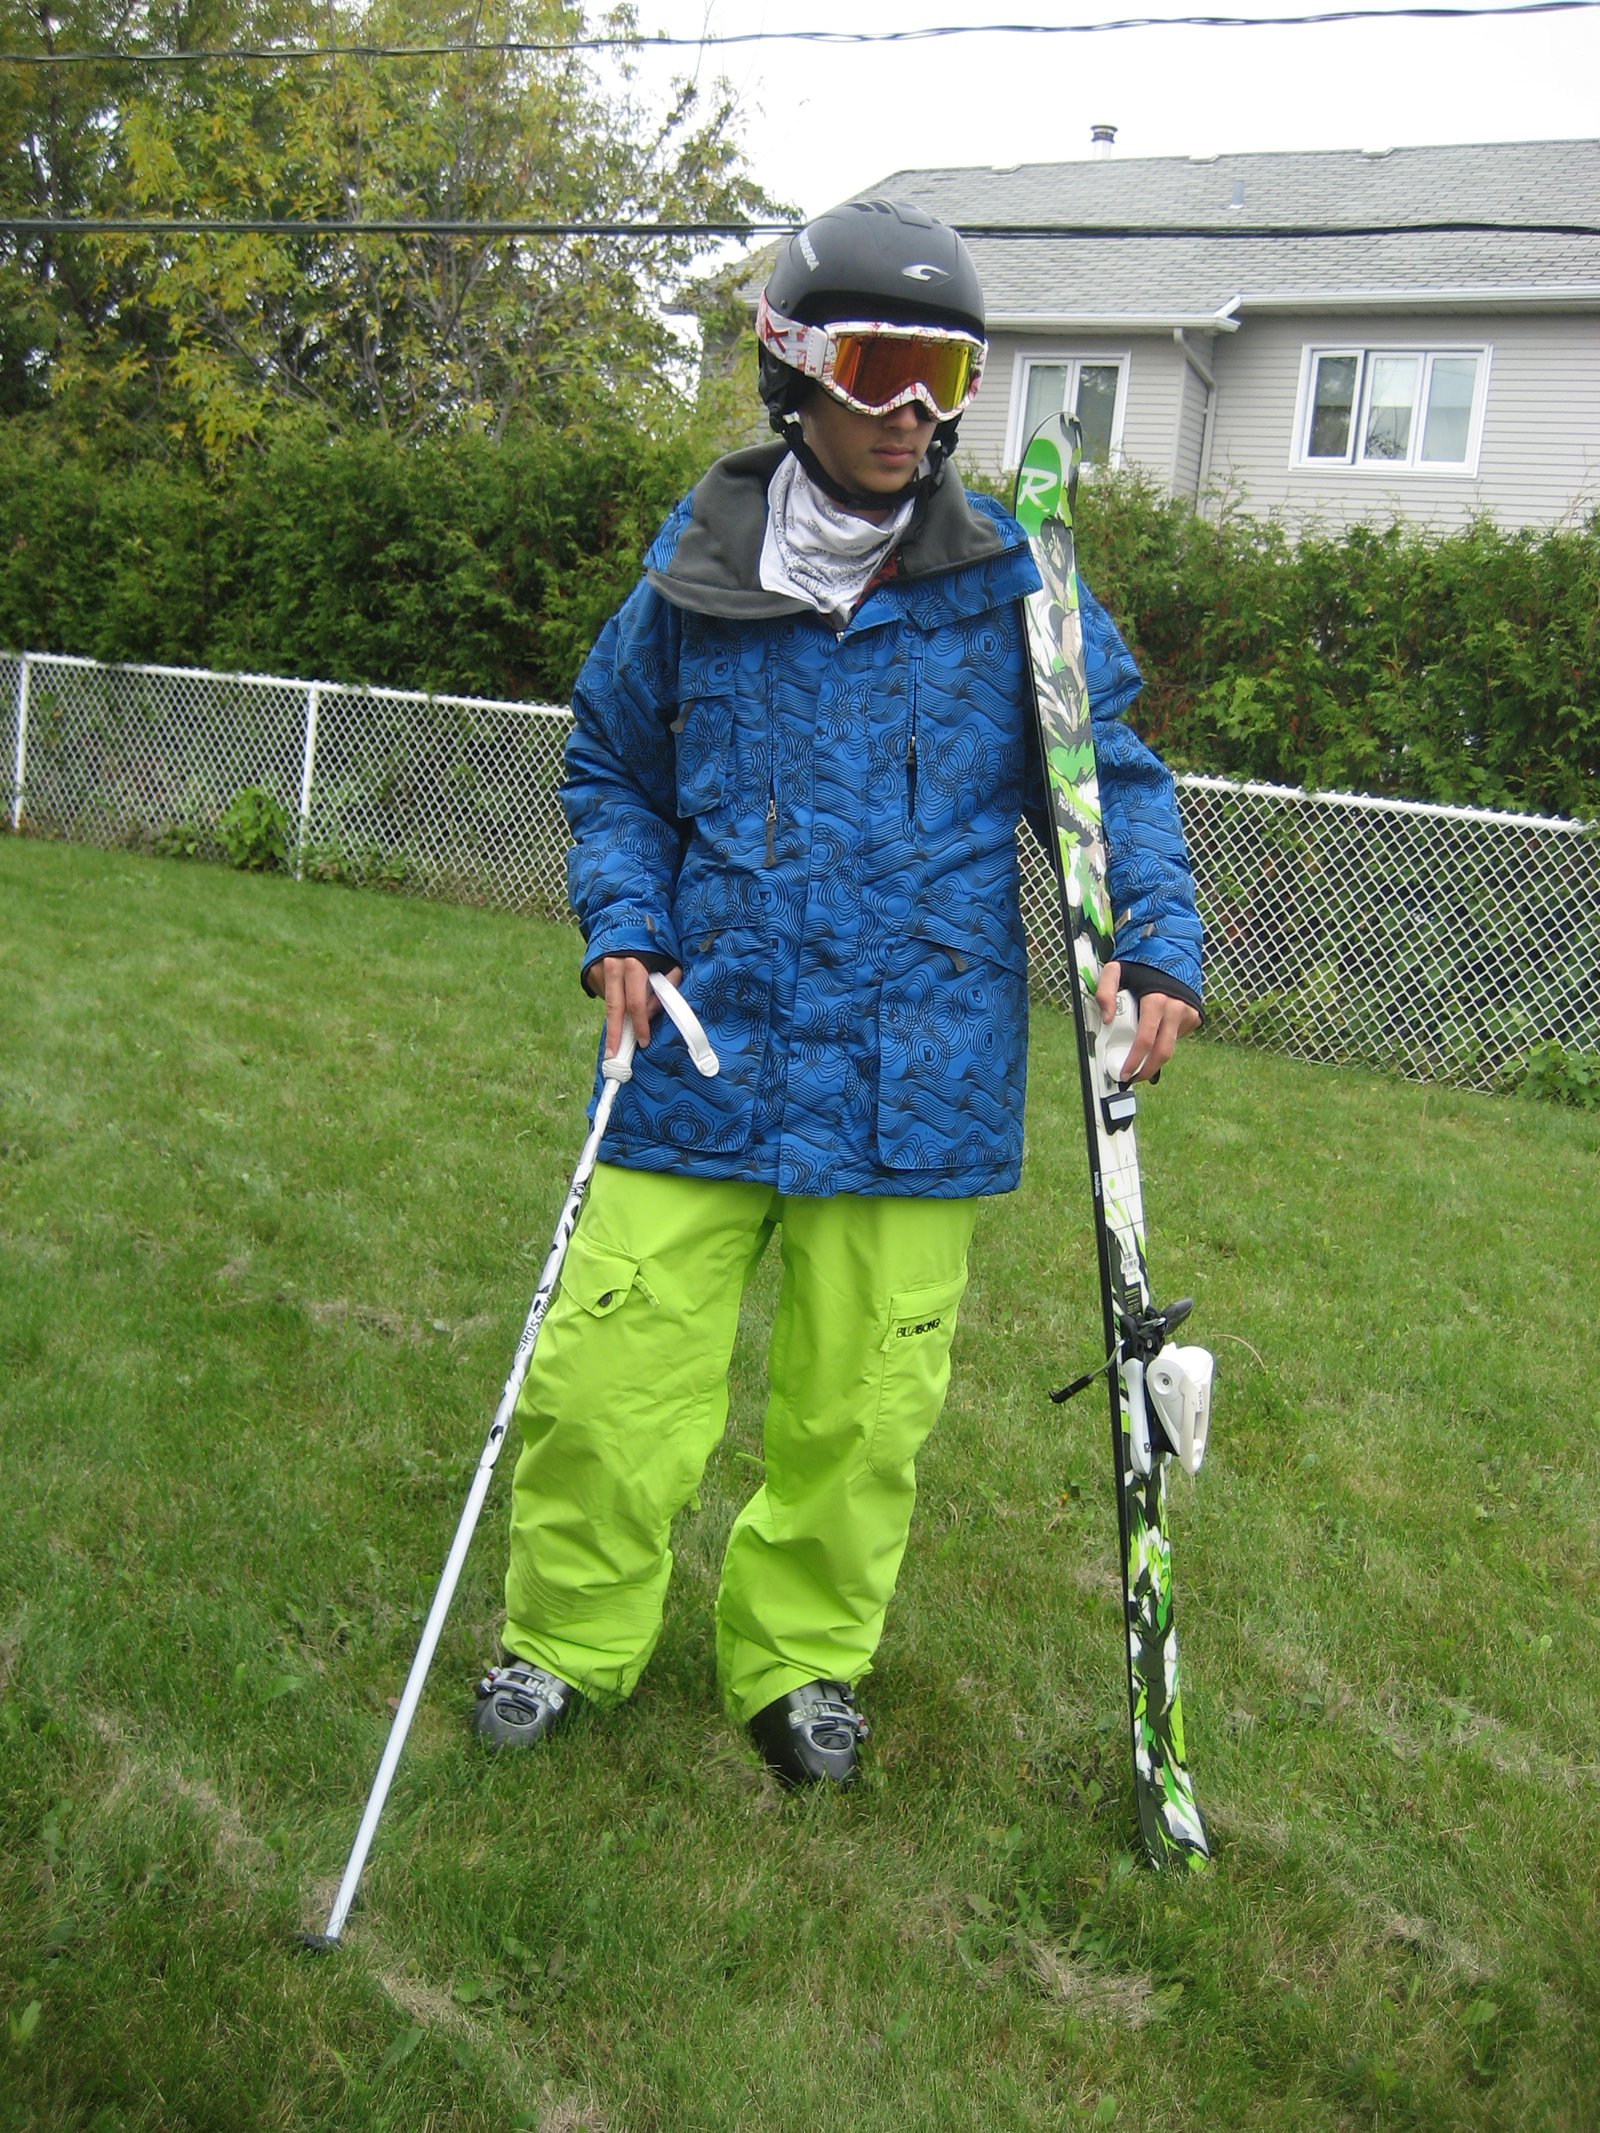 My rossignol s2, 2009 & my whole suit